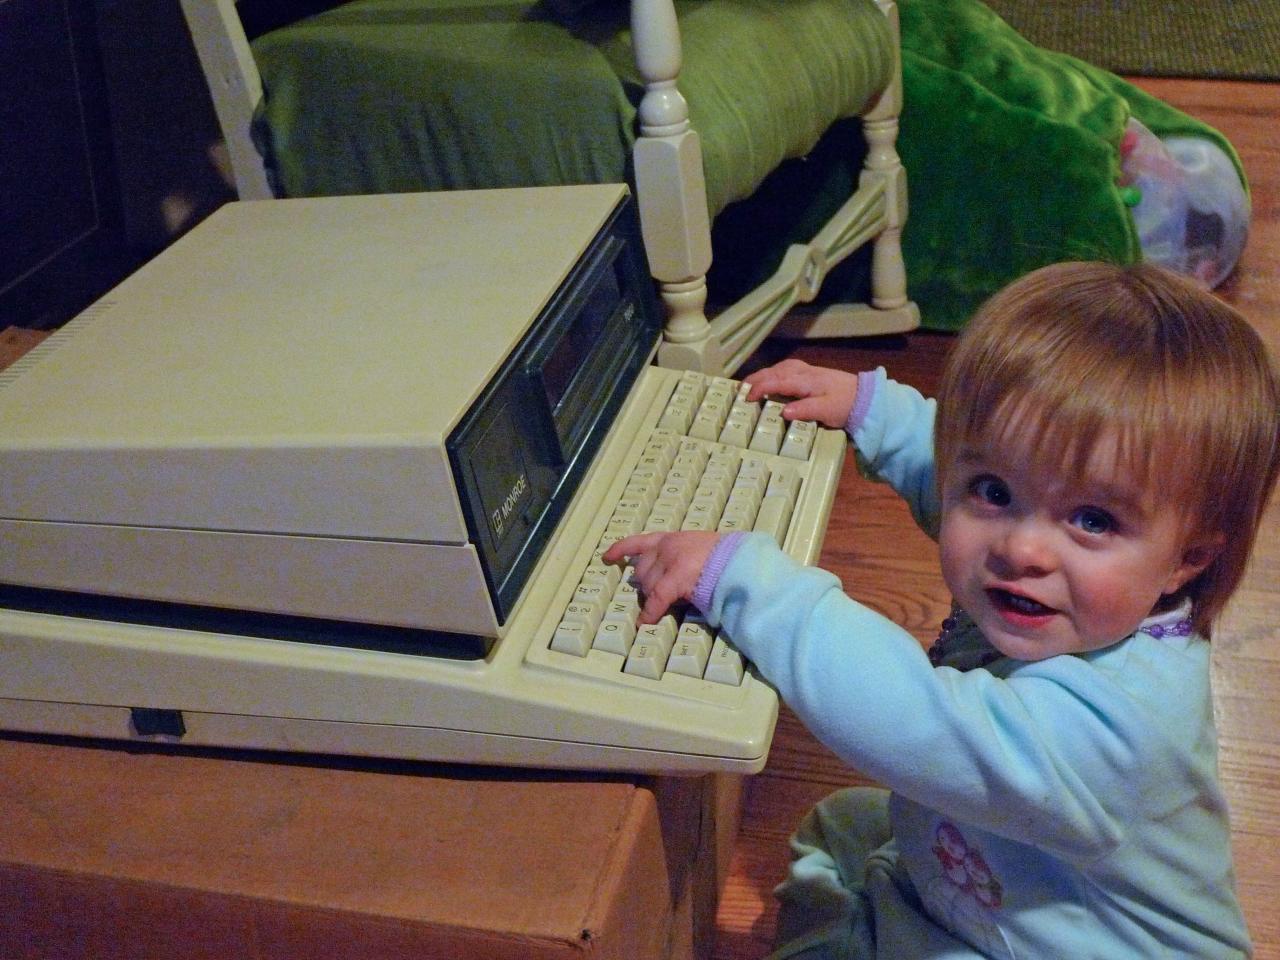 Toddler using old word processor